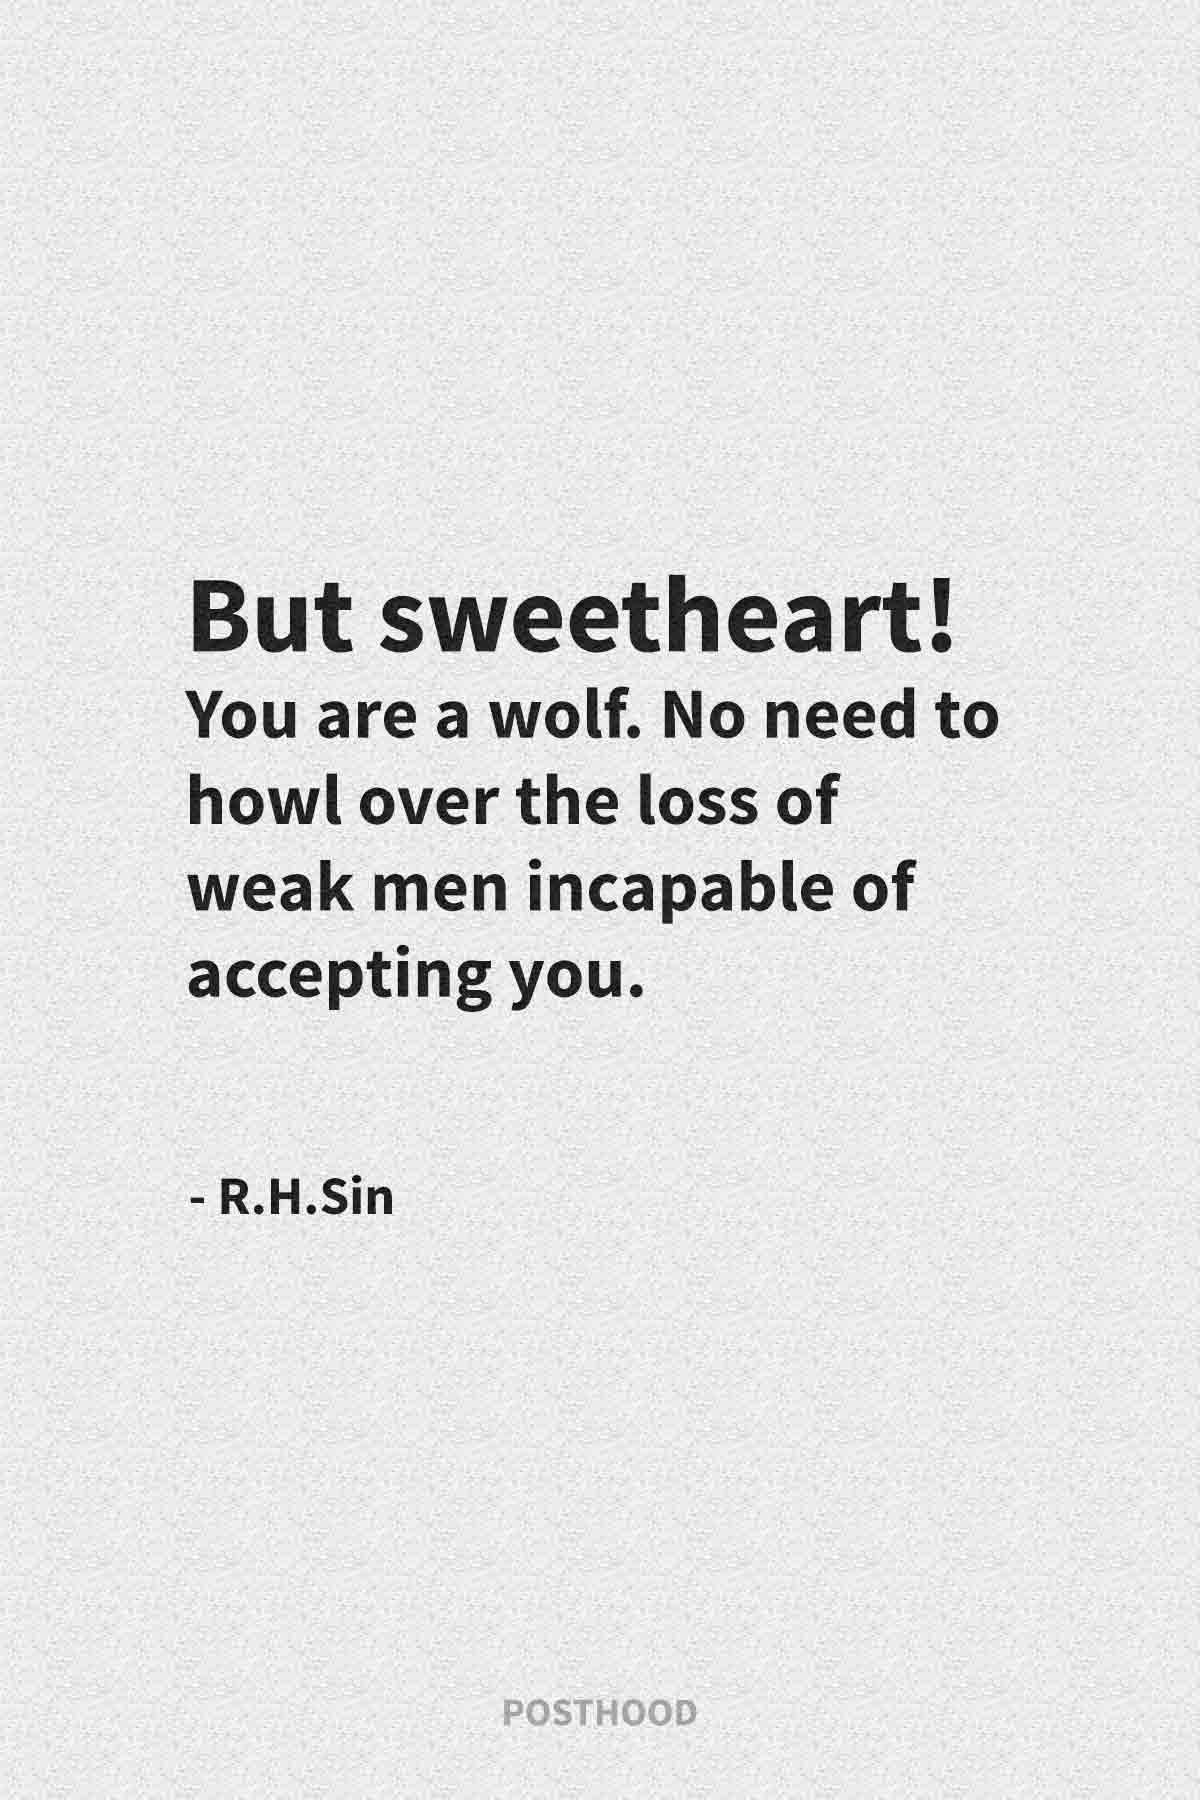 R.H.Sin quotes about how men should love women and how strong women should think when taken for granted in relationship.